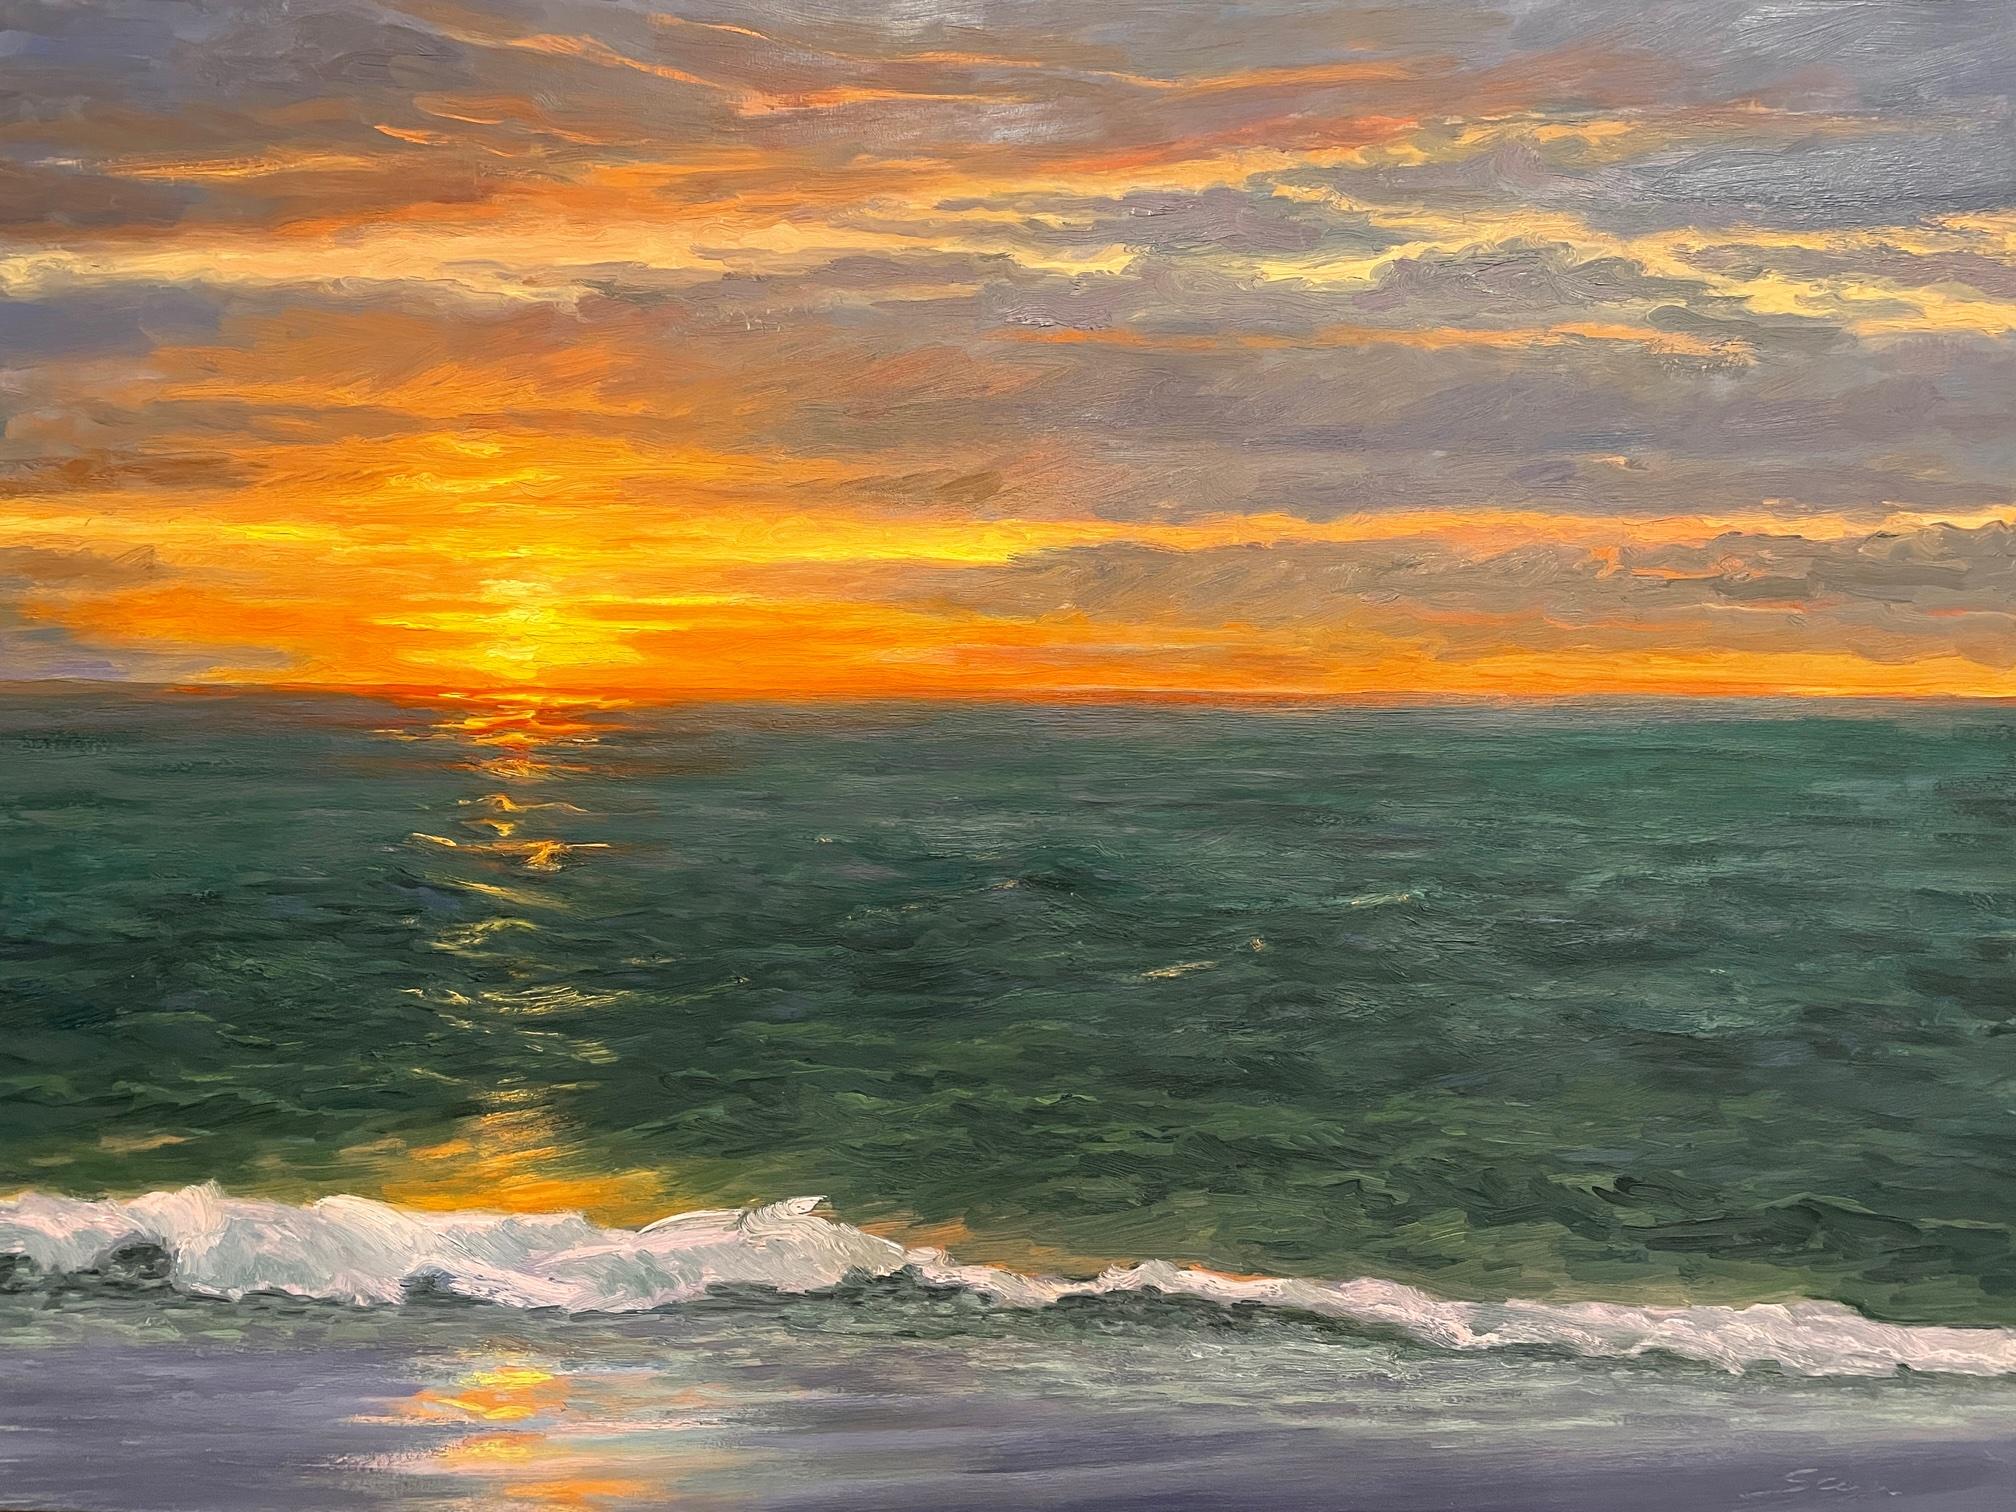 Carl Scorza Landscape Painting - Seascape with sunlight through clouds on the horizon. Title - Twilight